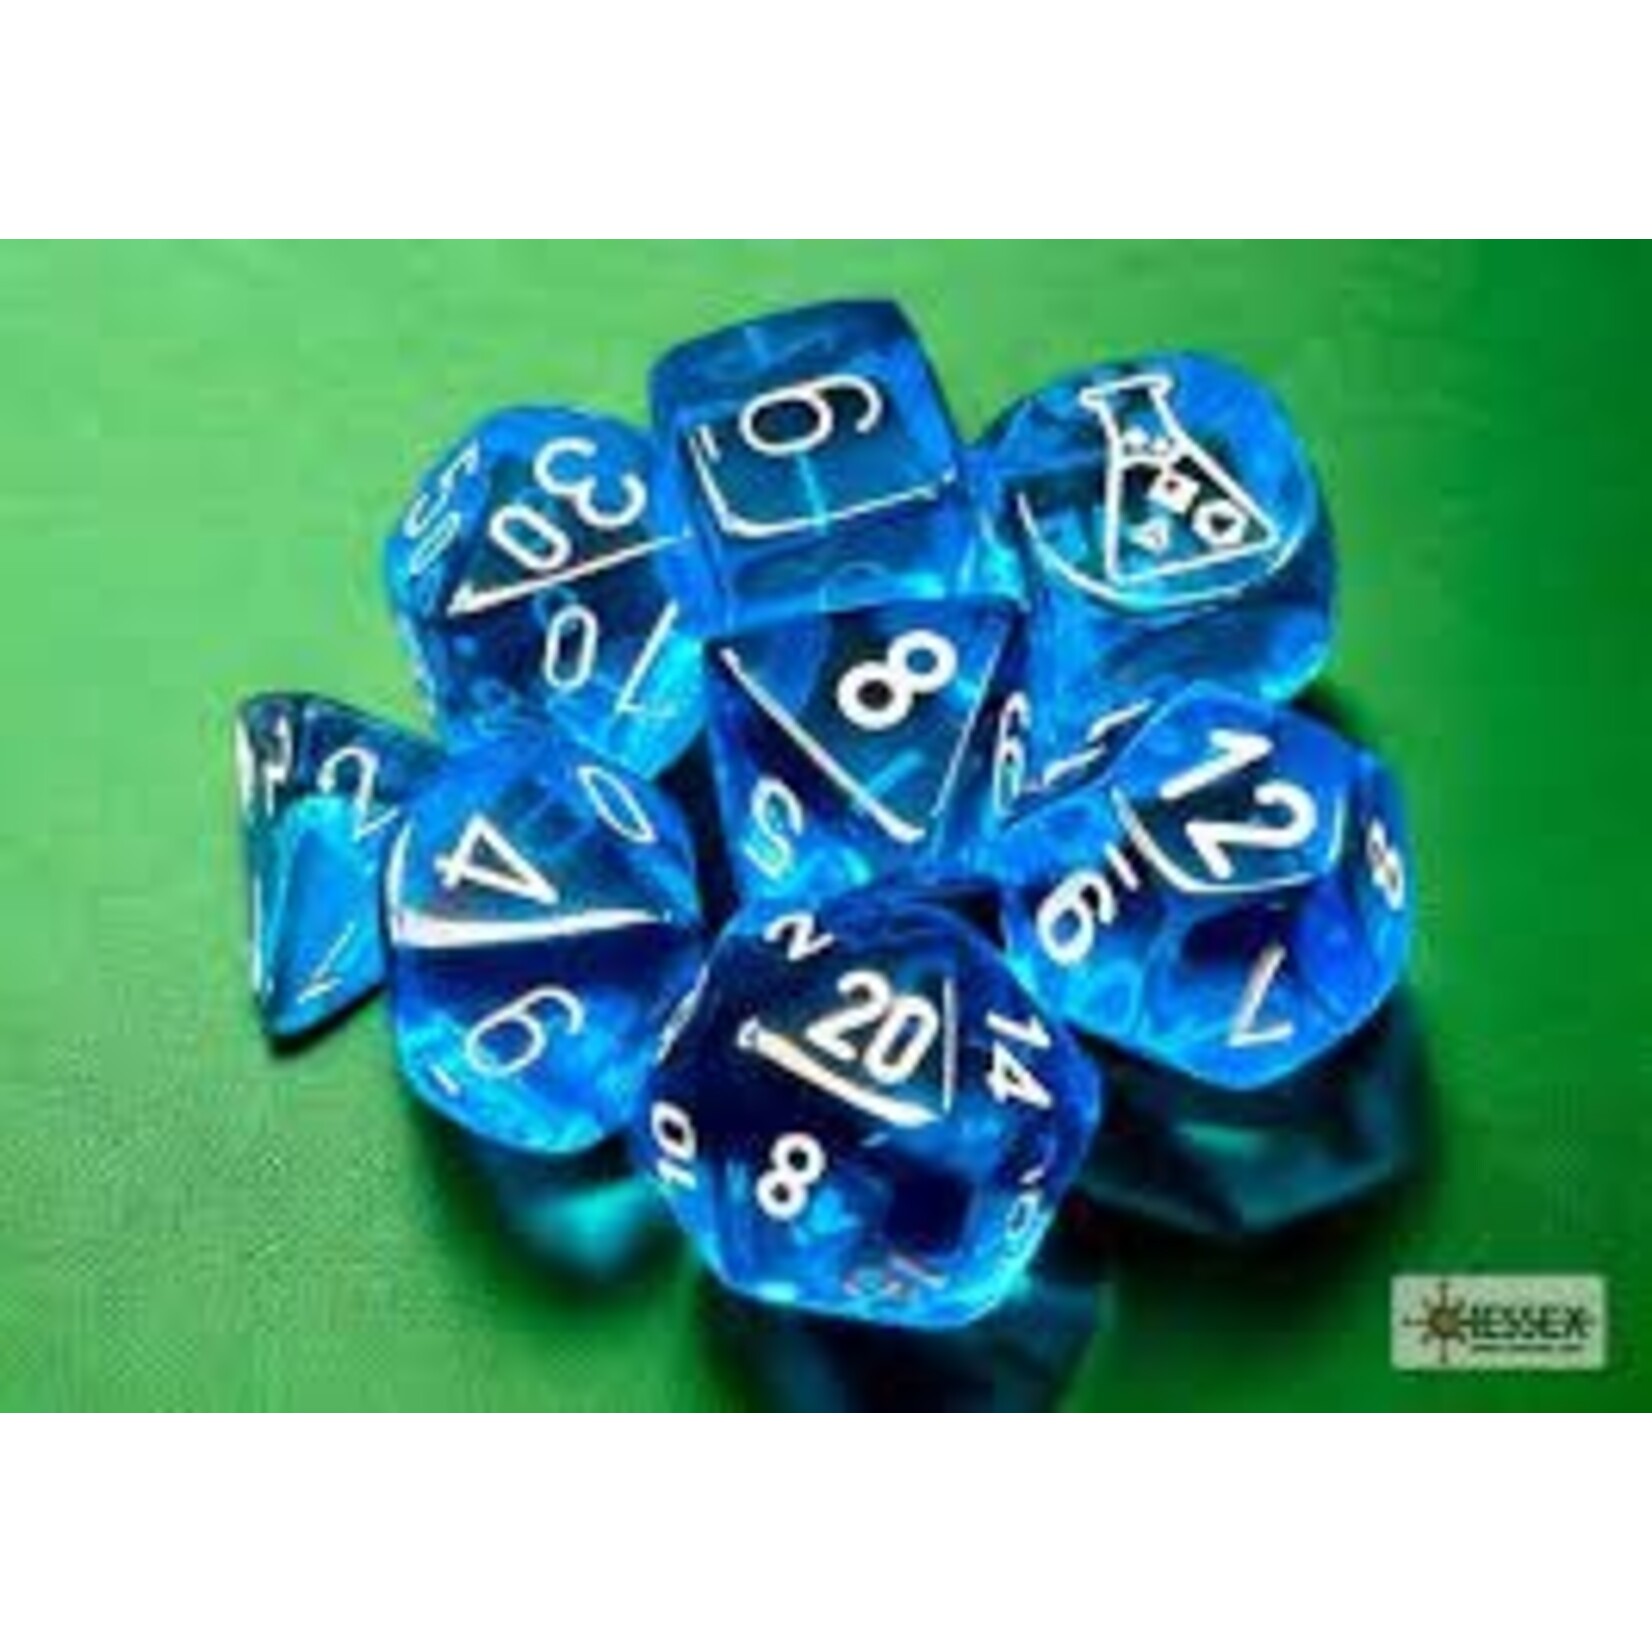 Chessex Chessex Lab Dice Translucent Tropical Blue With White (7) Set